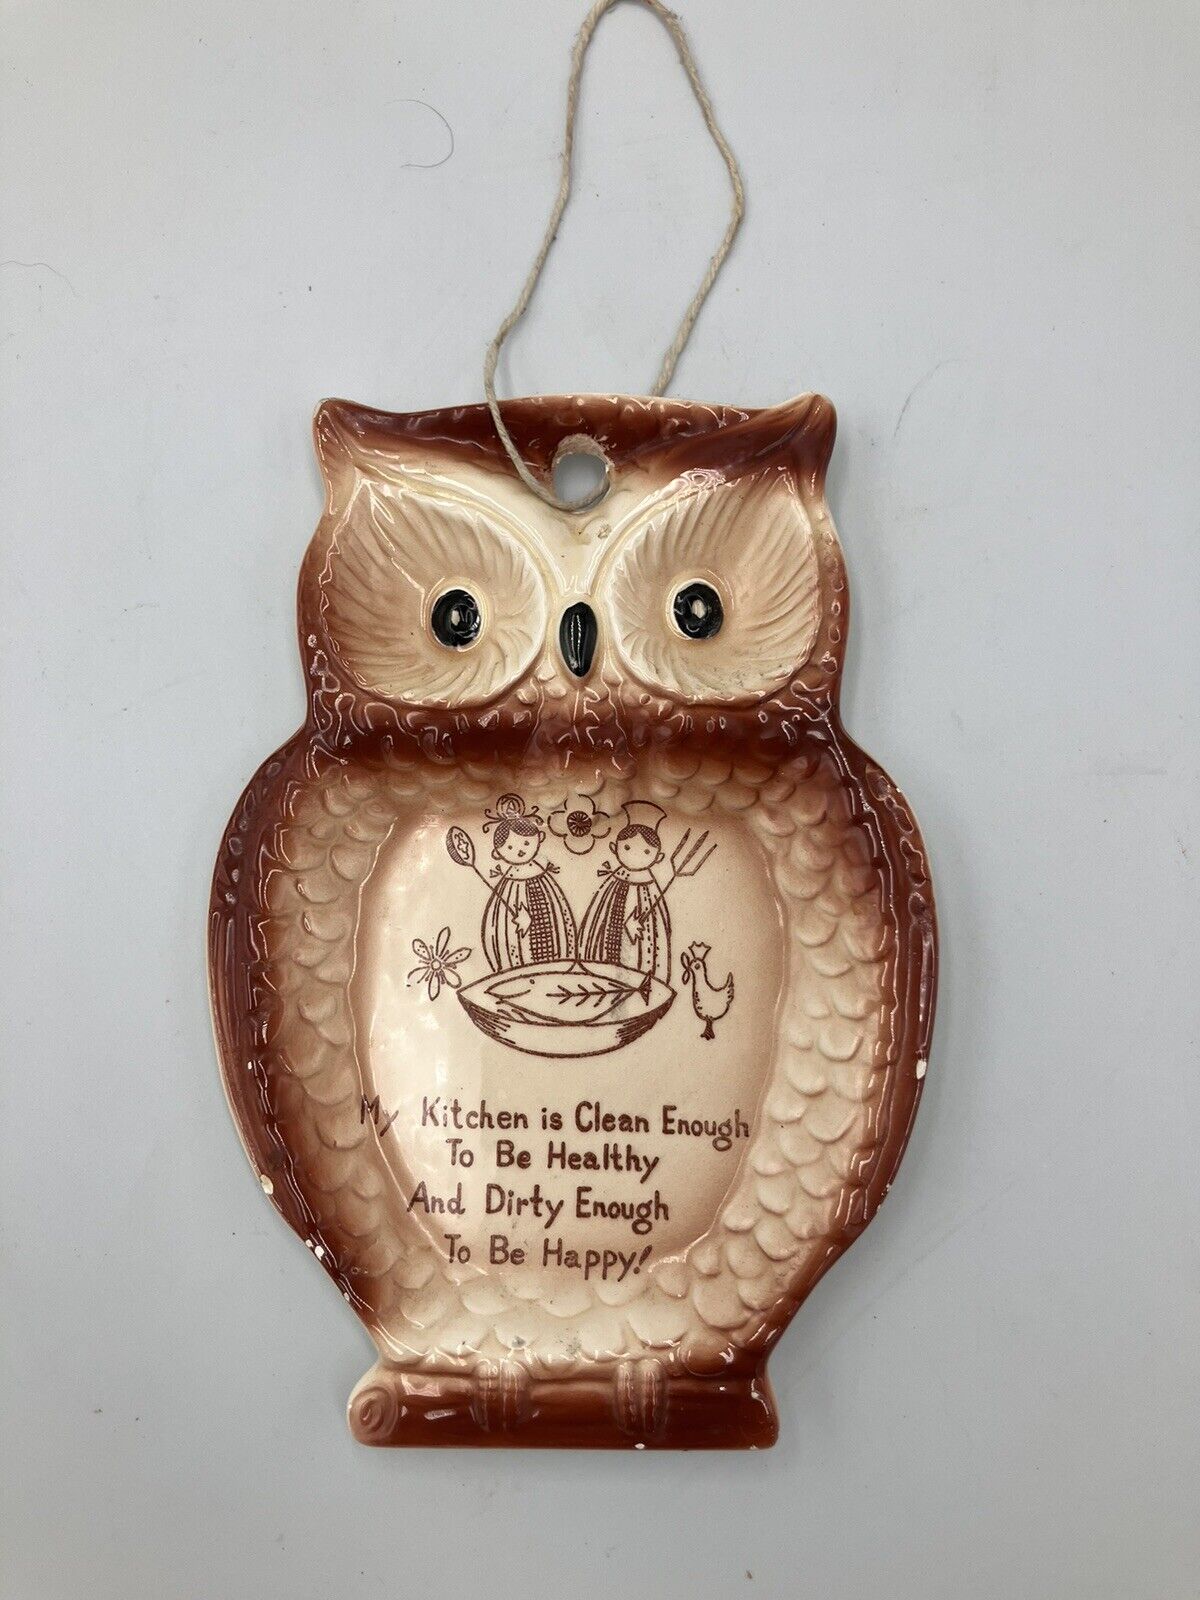 Vintage 1960s Owl Spoon Rest, Hanging, with Nostalgic Verse